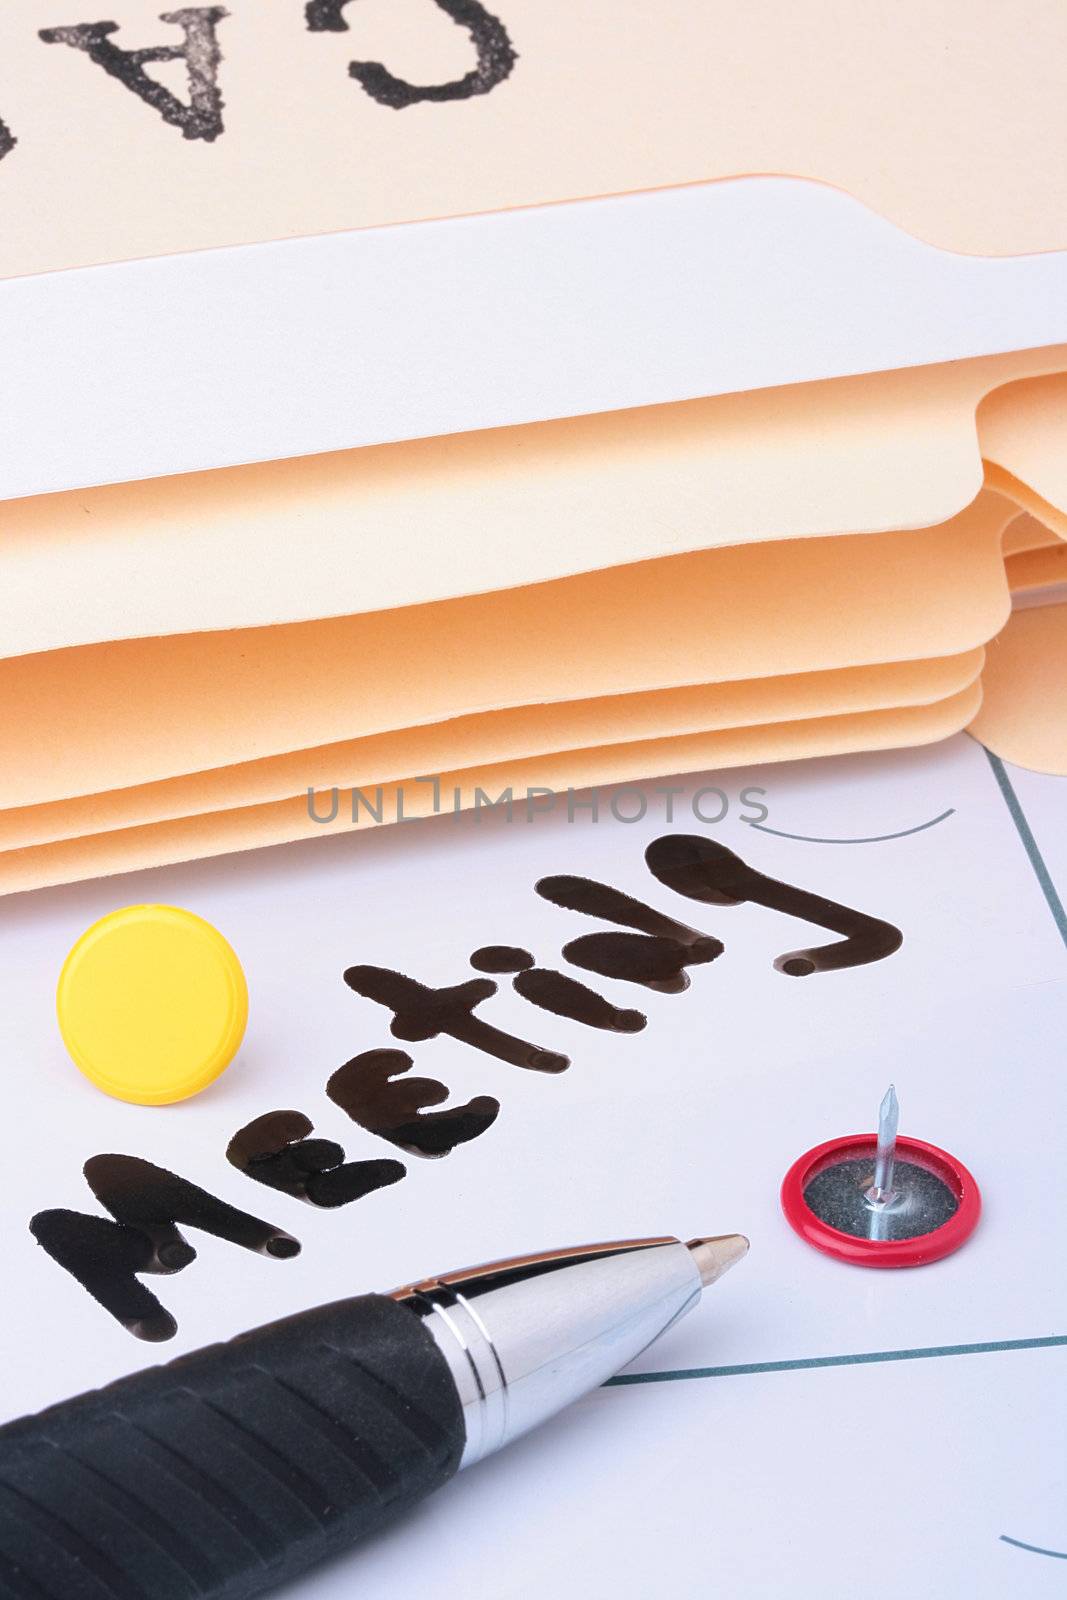 The information on a calendar about meeting with office accessories.